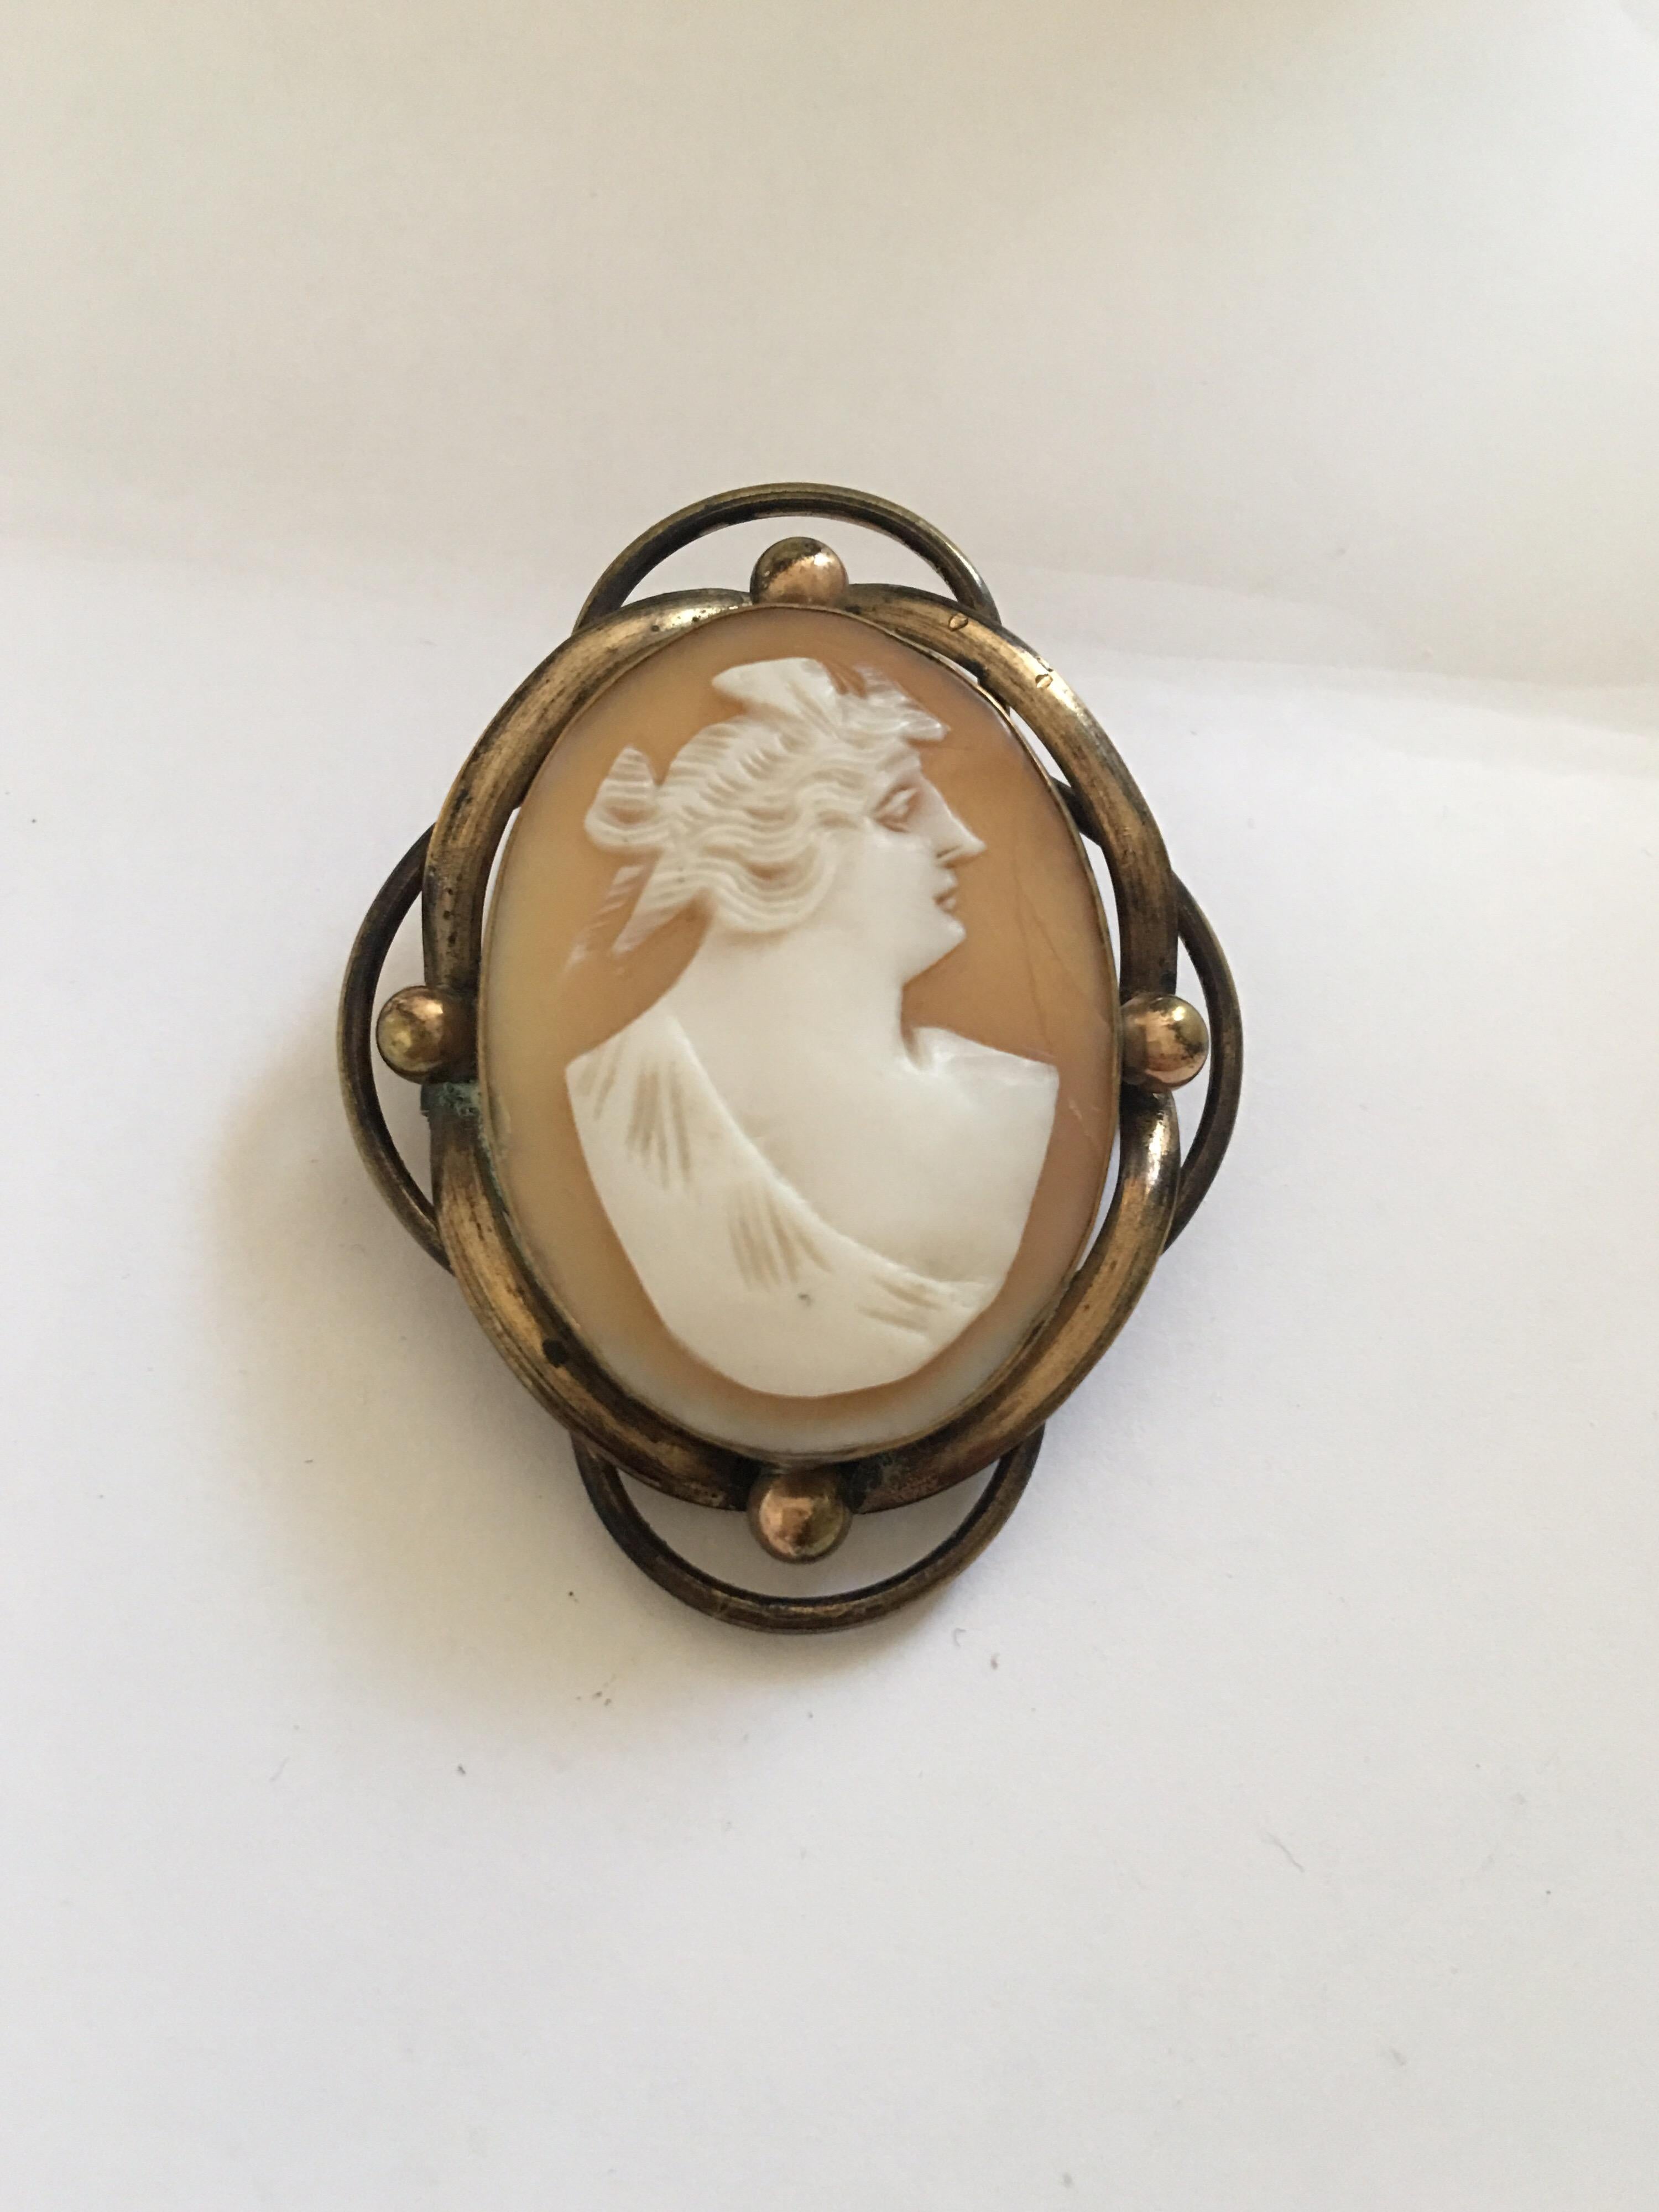 Antique Gold-Plated Victorian Pendant / Brooch Cameo 6